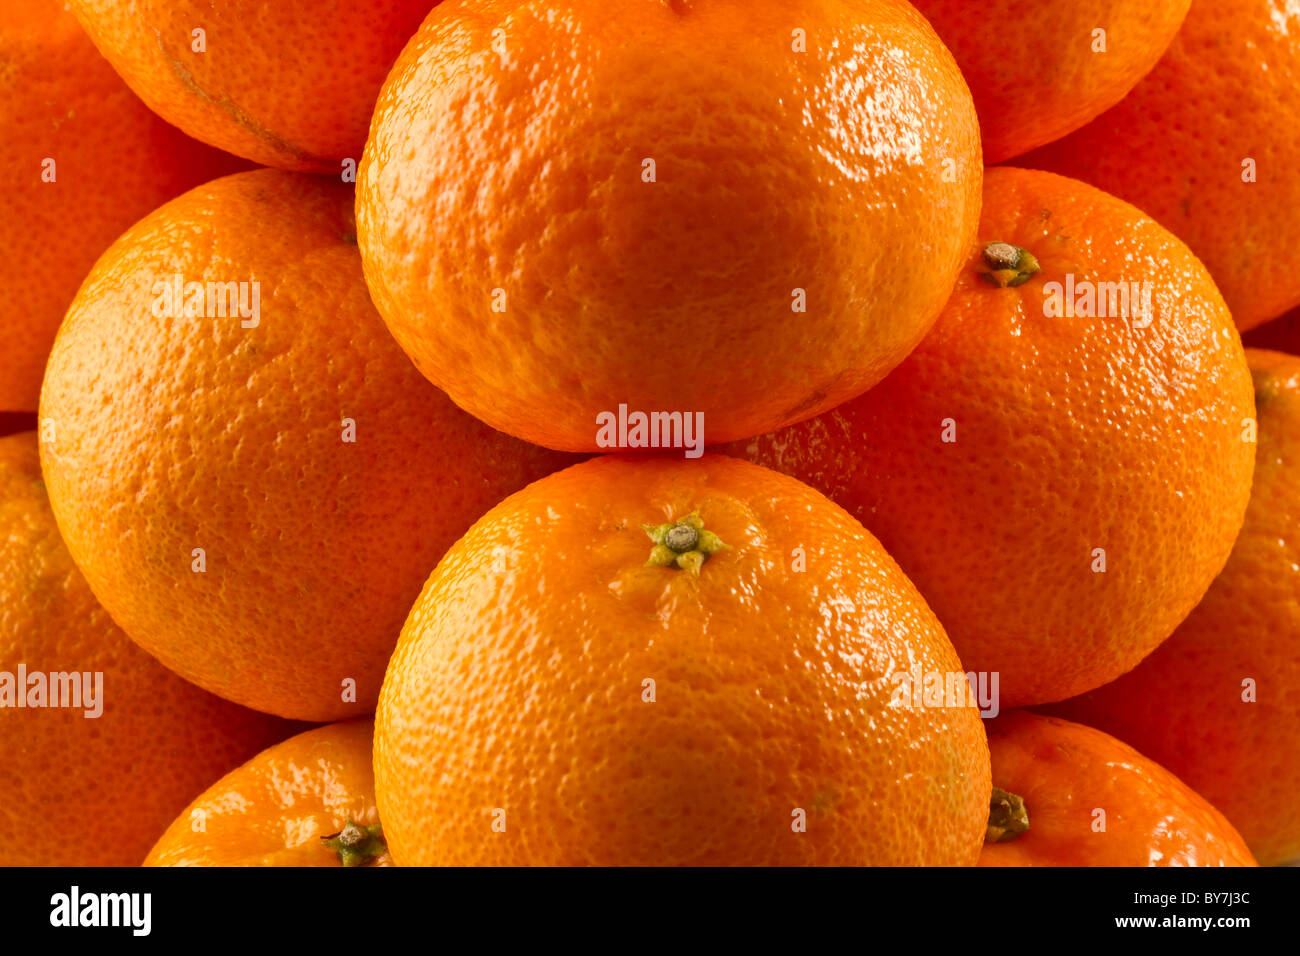 Clementines arranged in a pile Stock Photo